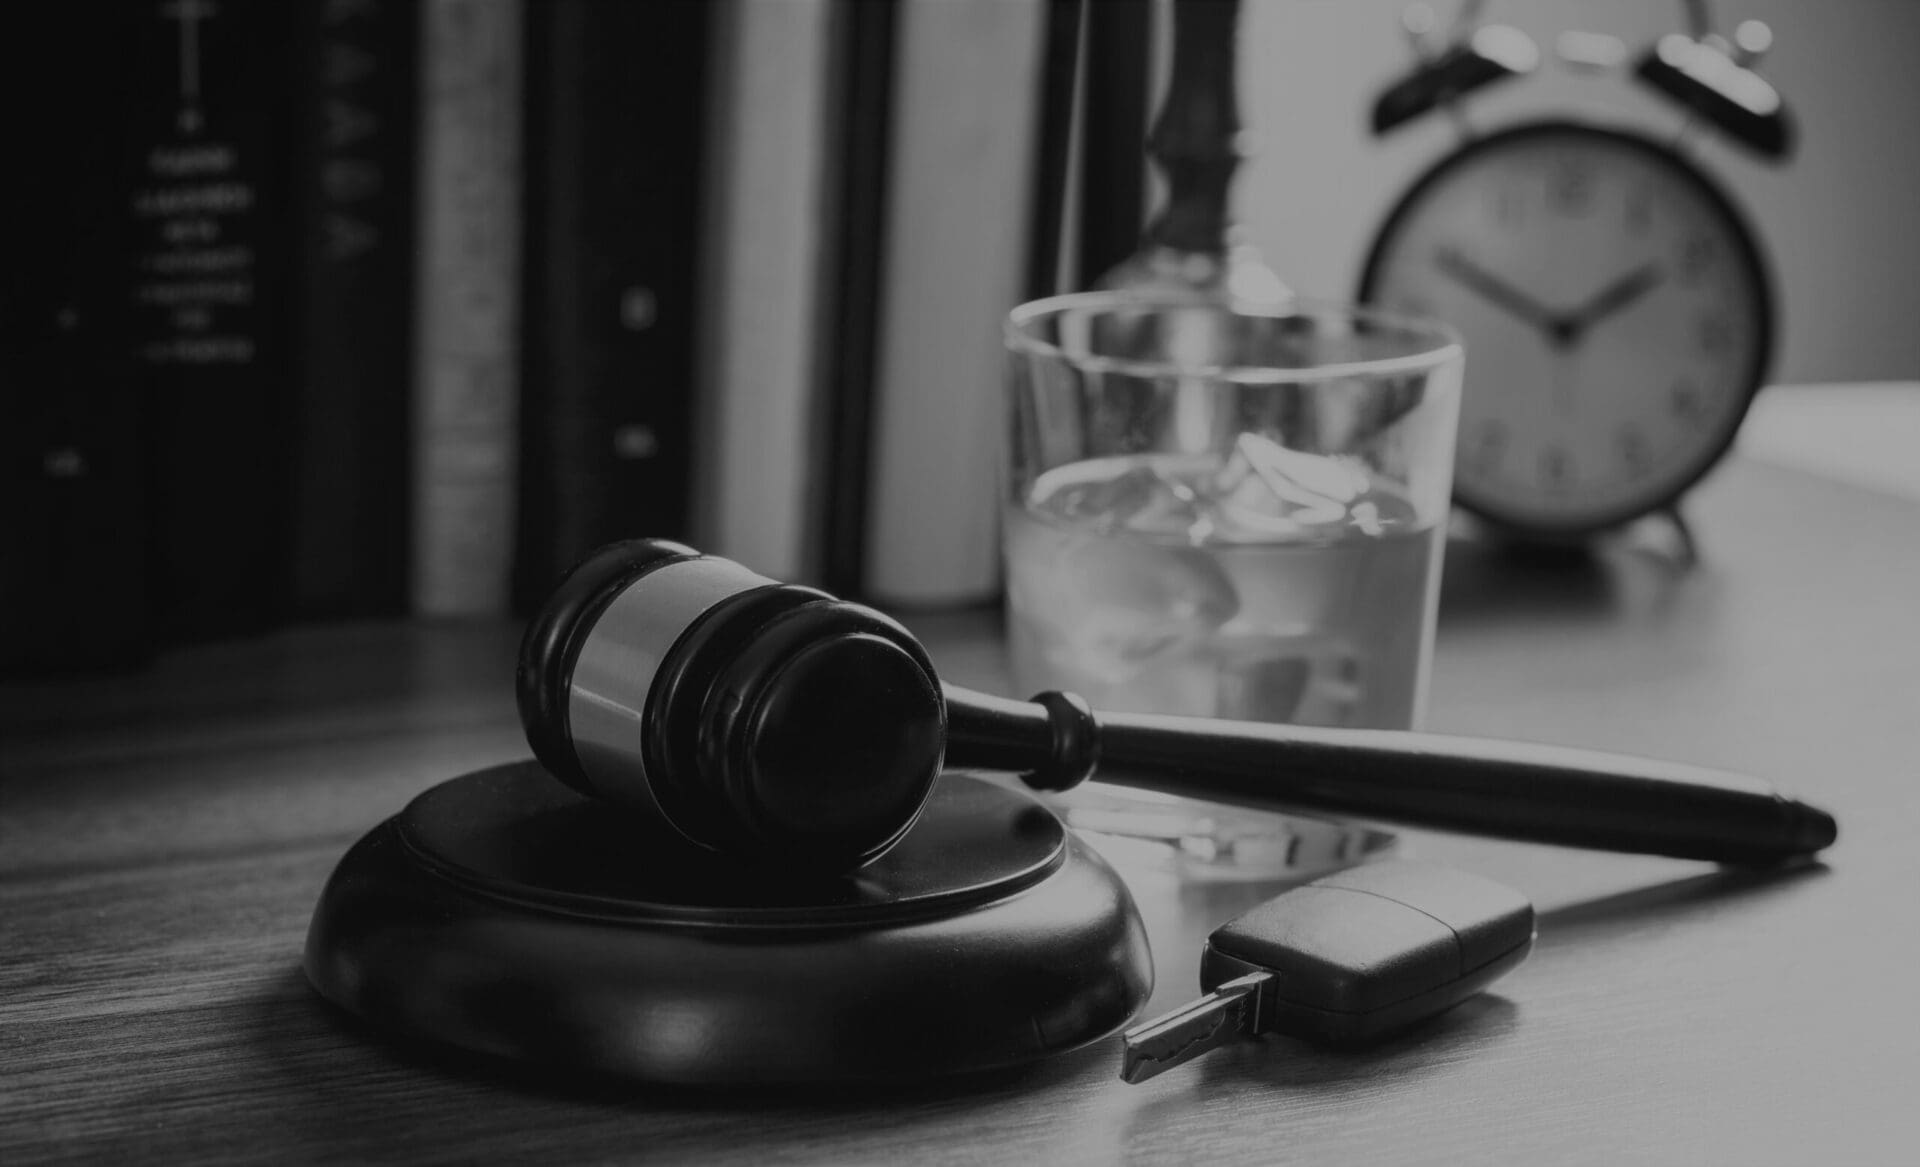 Tennessee DUI penalties described by a Nashville DUI defense law firm